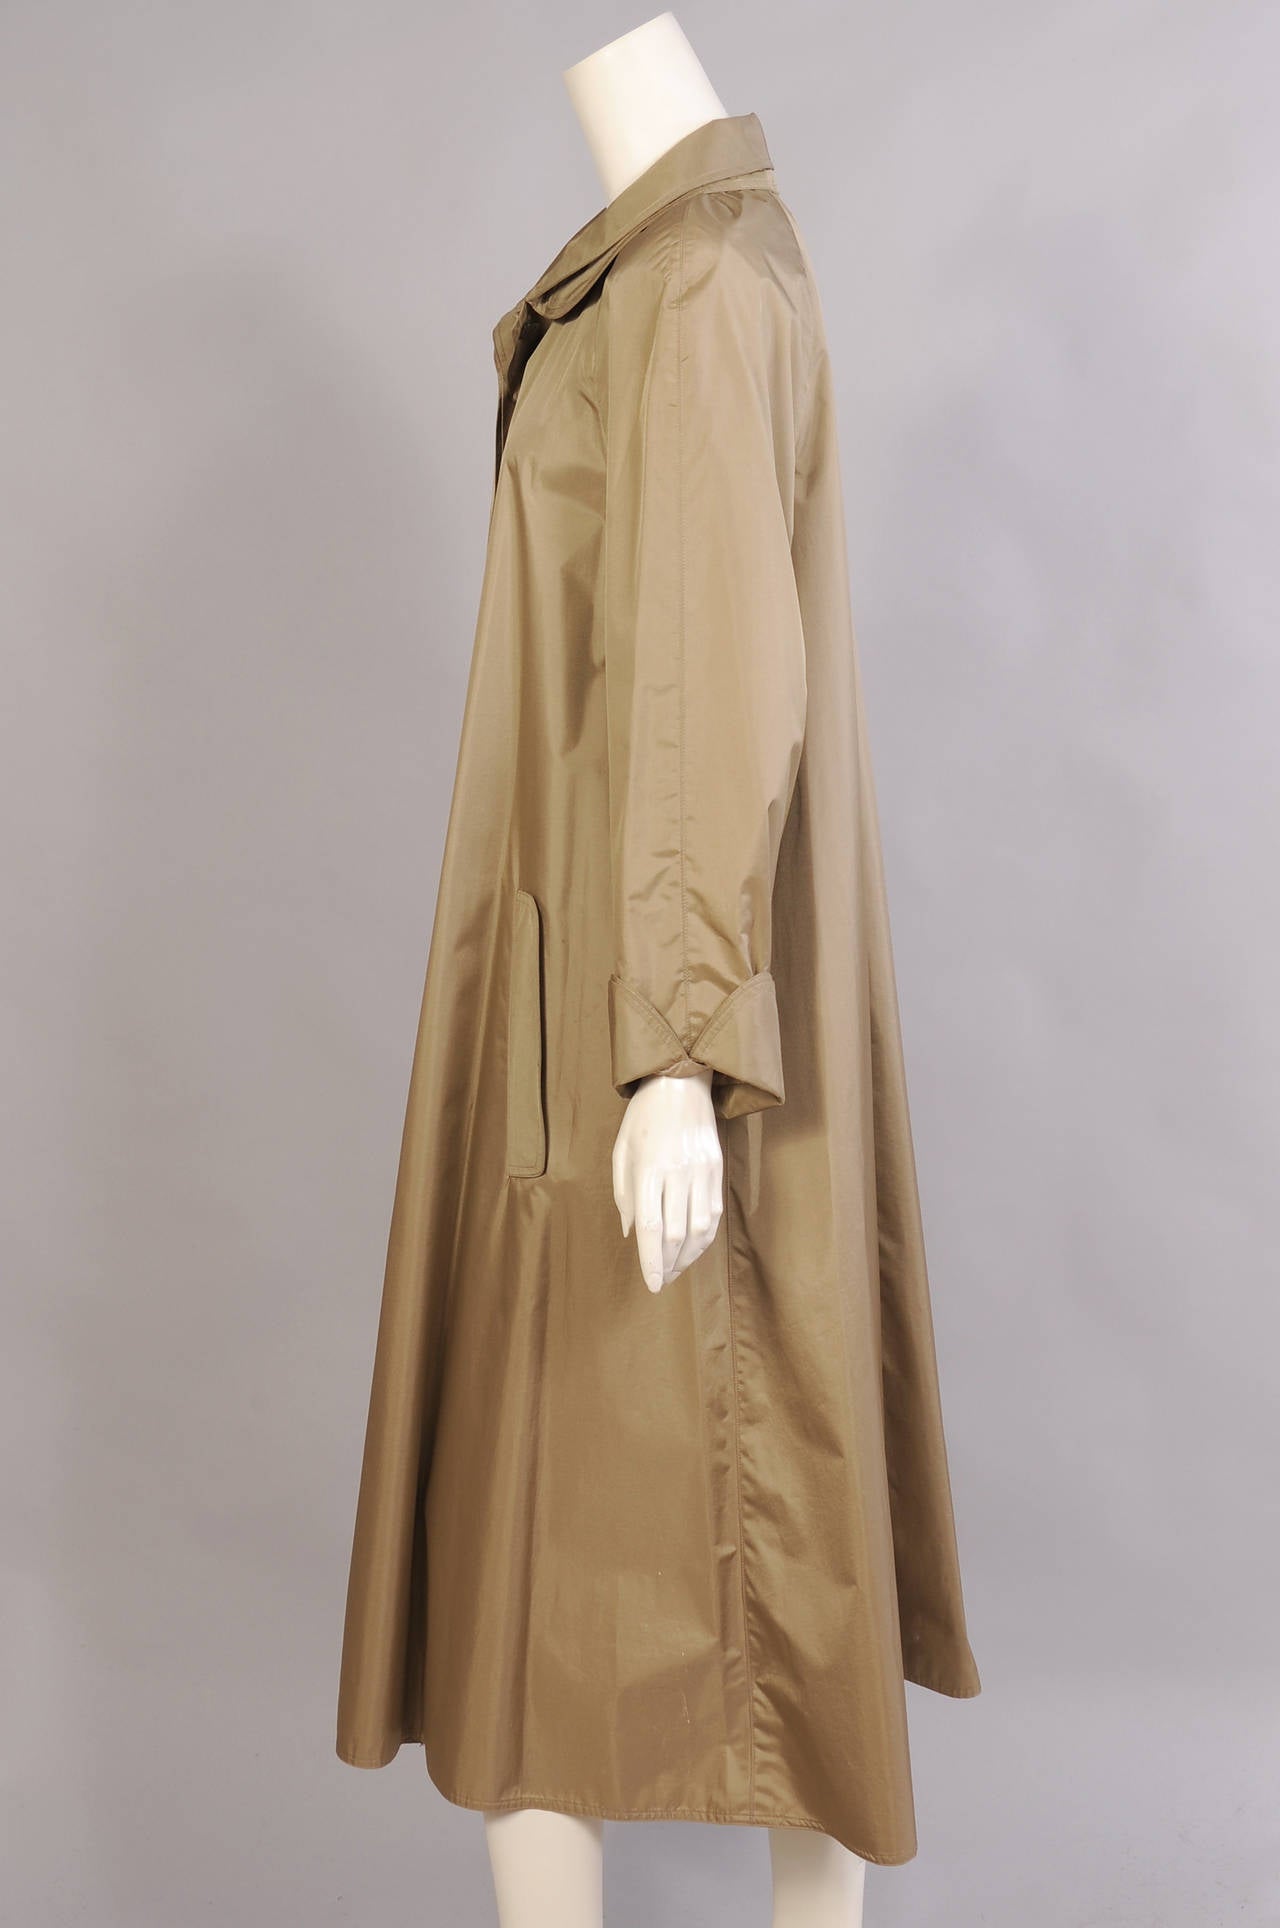 Chloe Raincoat, Never Worn, Rare Larger Size For Sale at 1stdibs